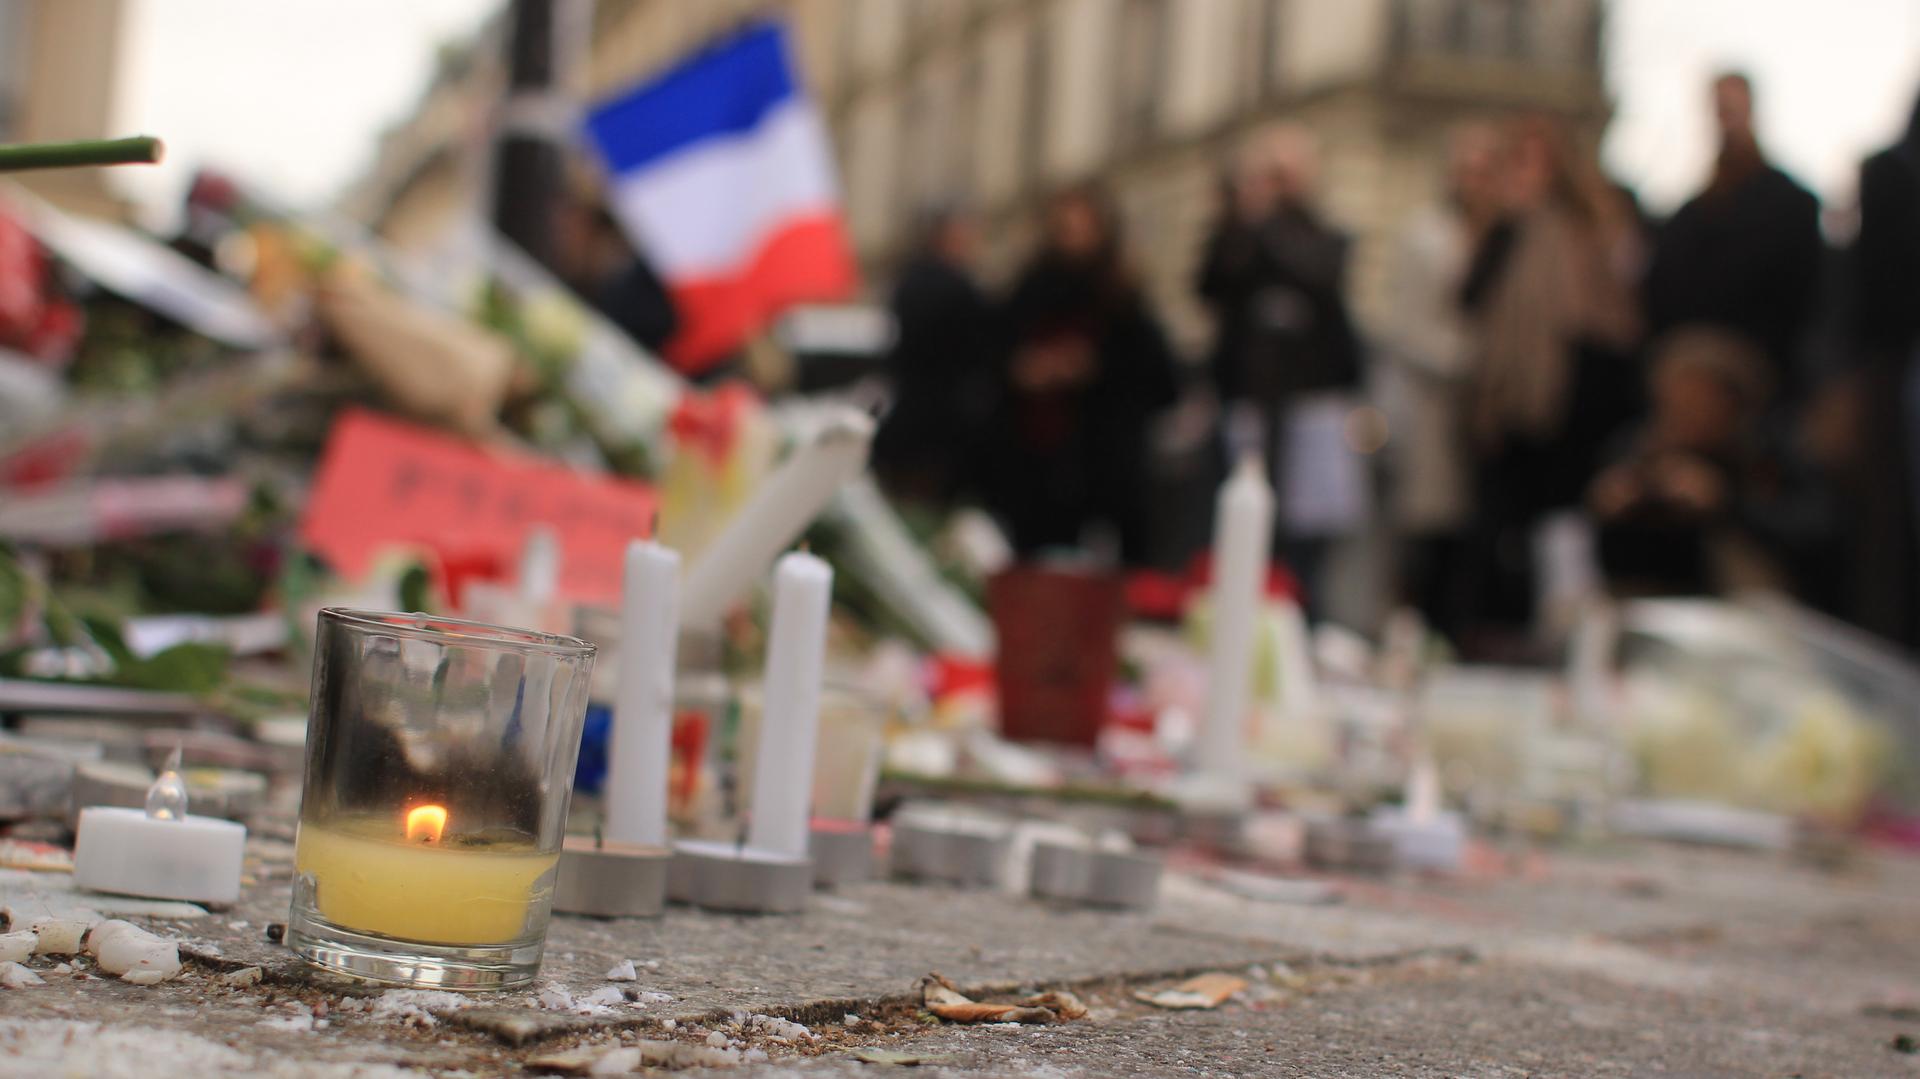 A candle outside Le Carillon bar in Paris, one of the scenes of Friday's attack, Hundreds of Parisians on Monday gathered there to pay their respects in silence.